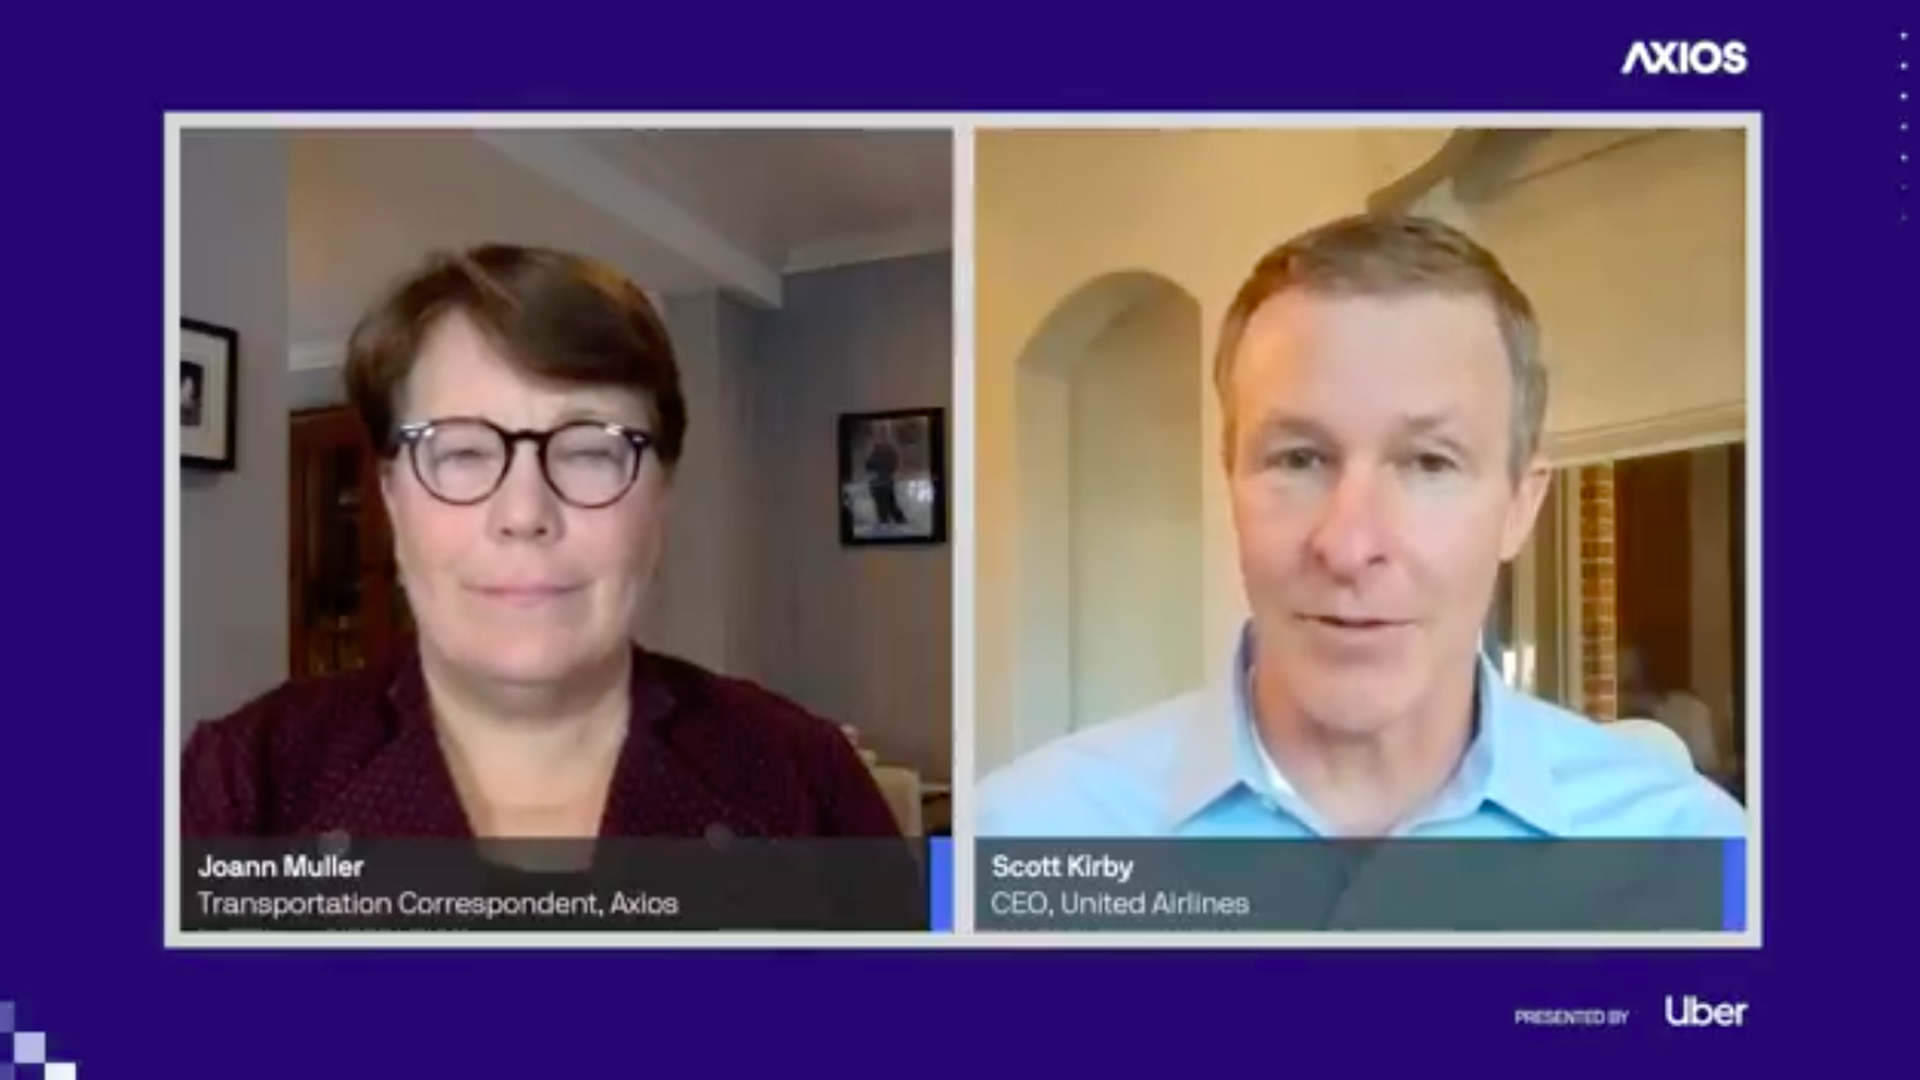 A screenshot of Axios' Joann Muller and Scott Kirby on a video call